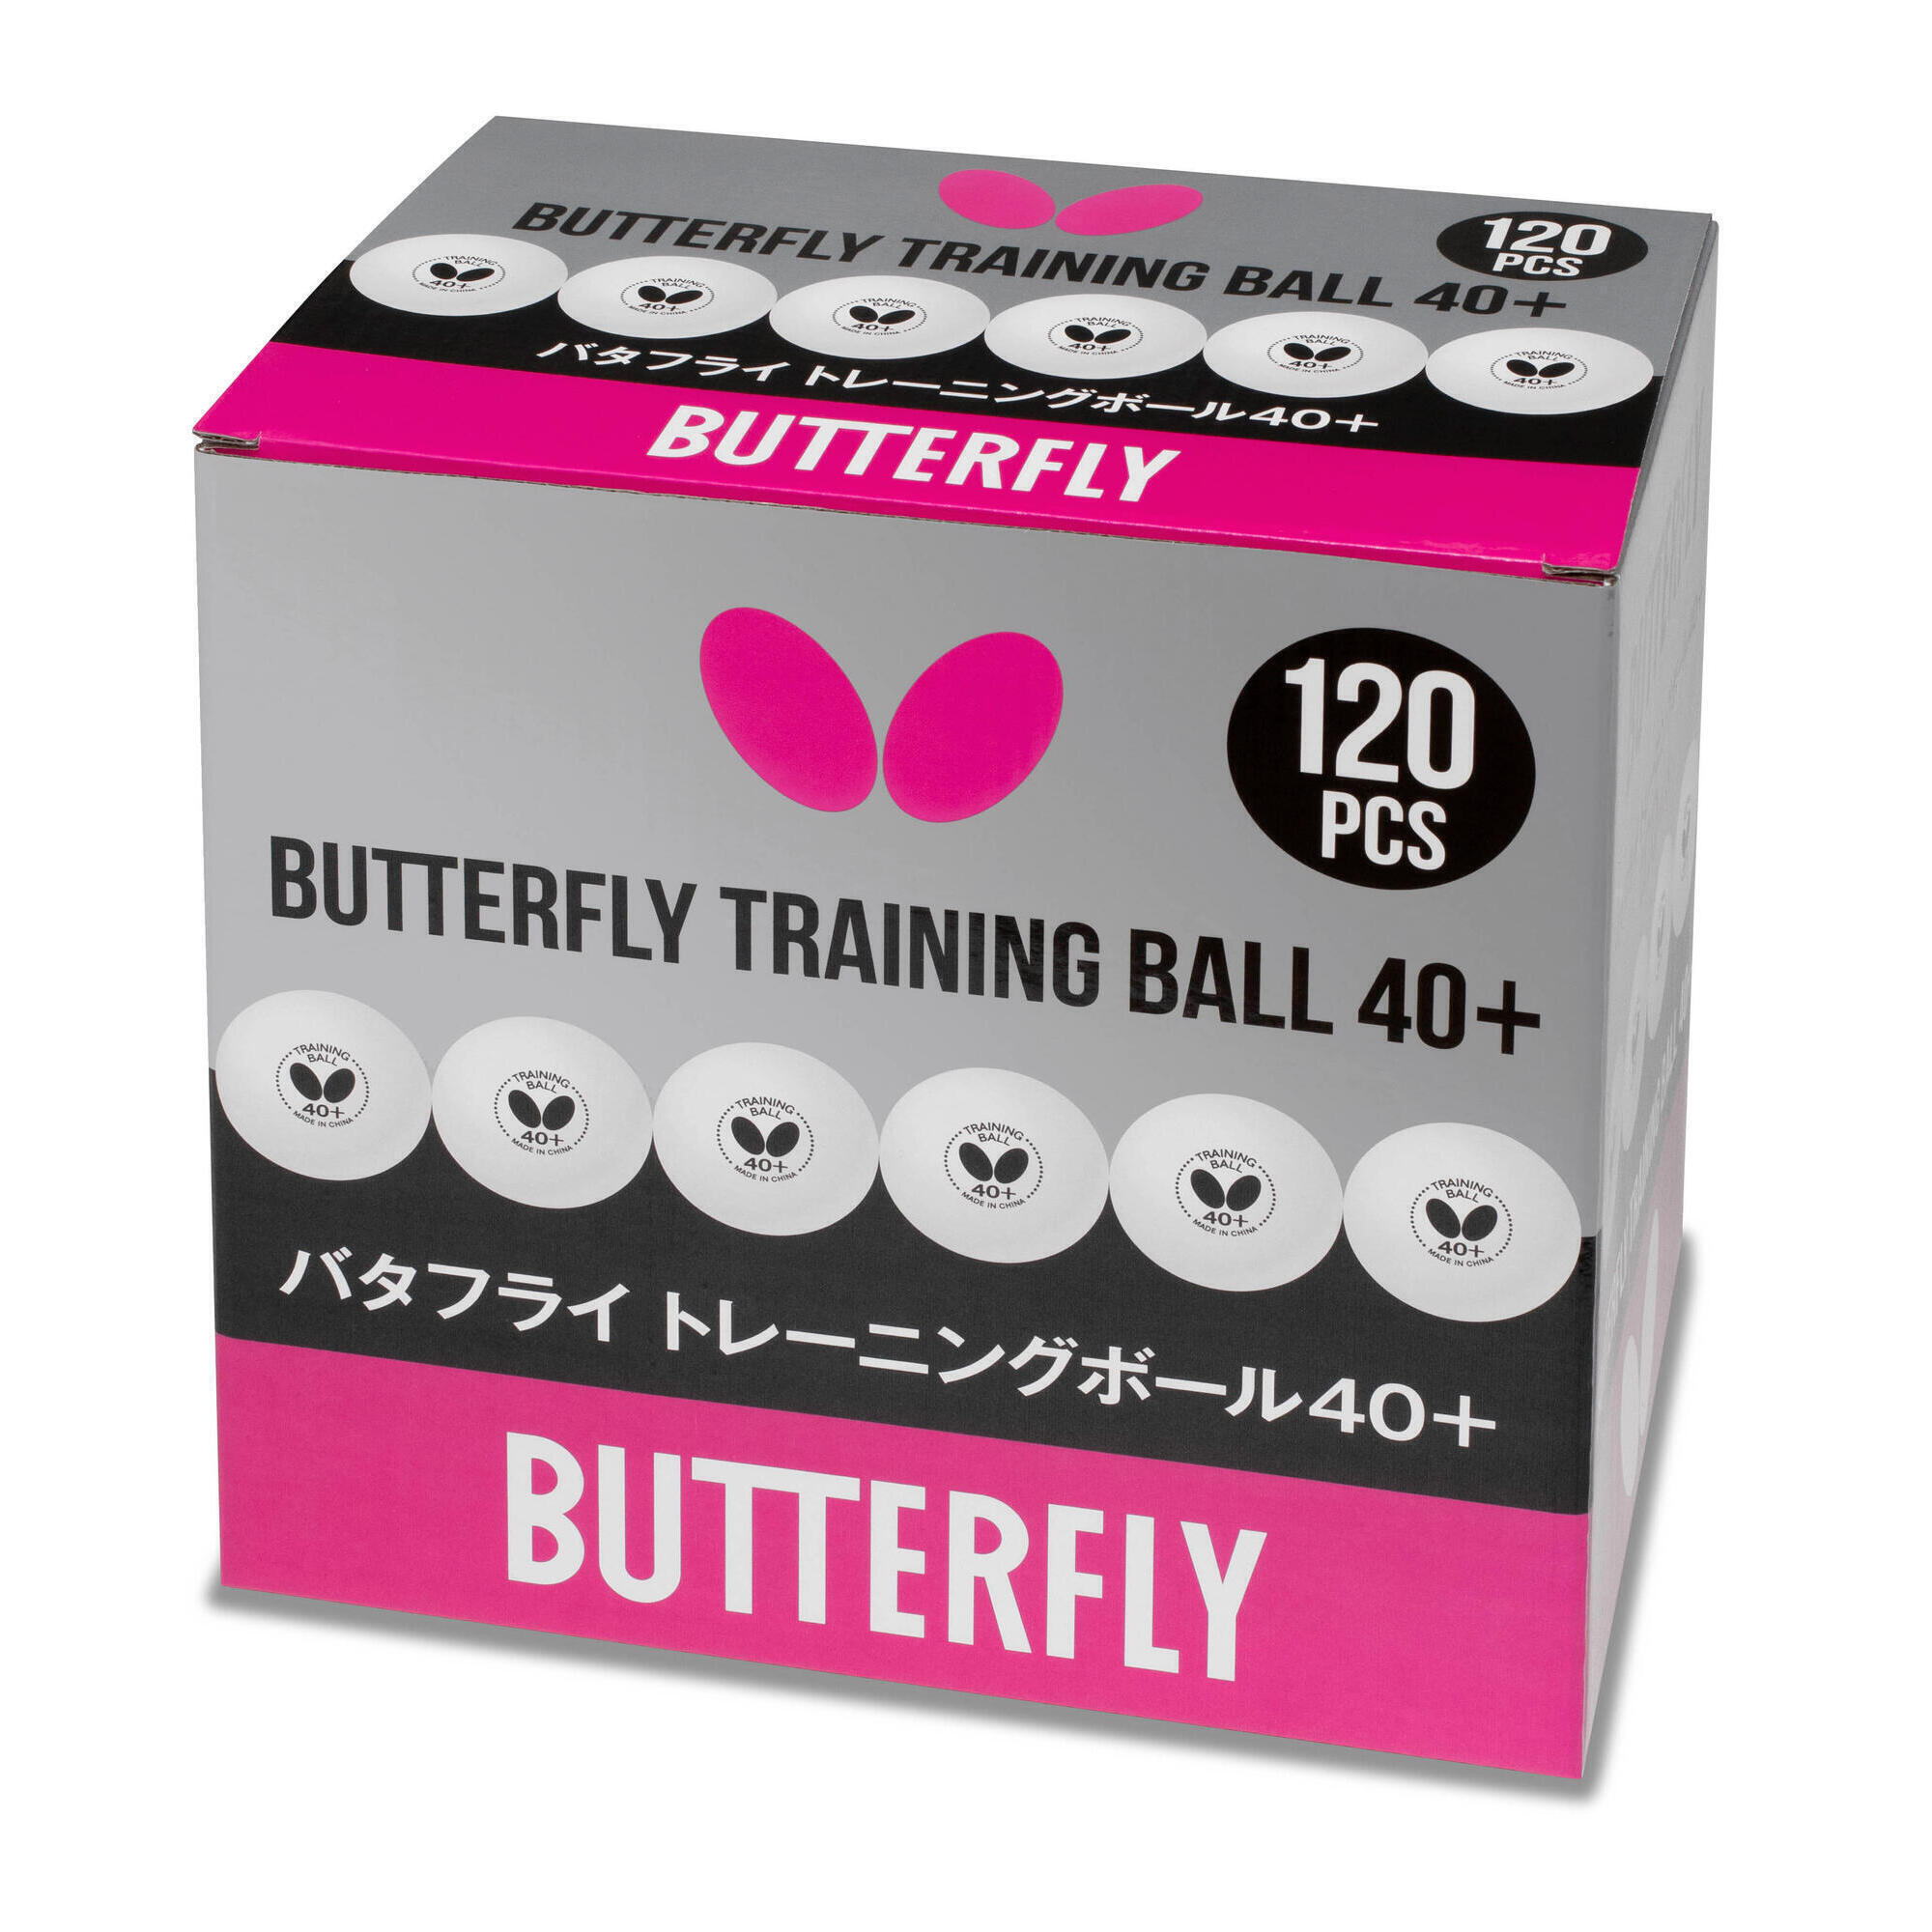 BUTTERFLY Butterfly Training Ball 40+ (Box of 120)